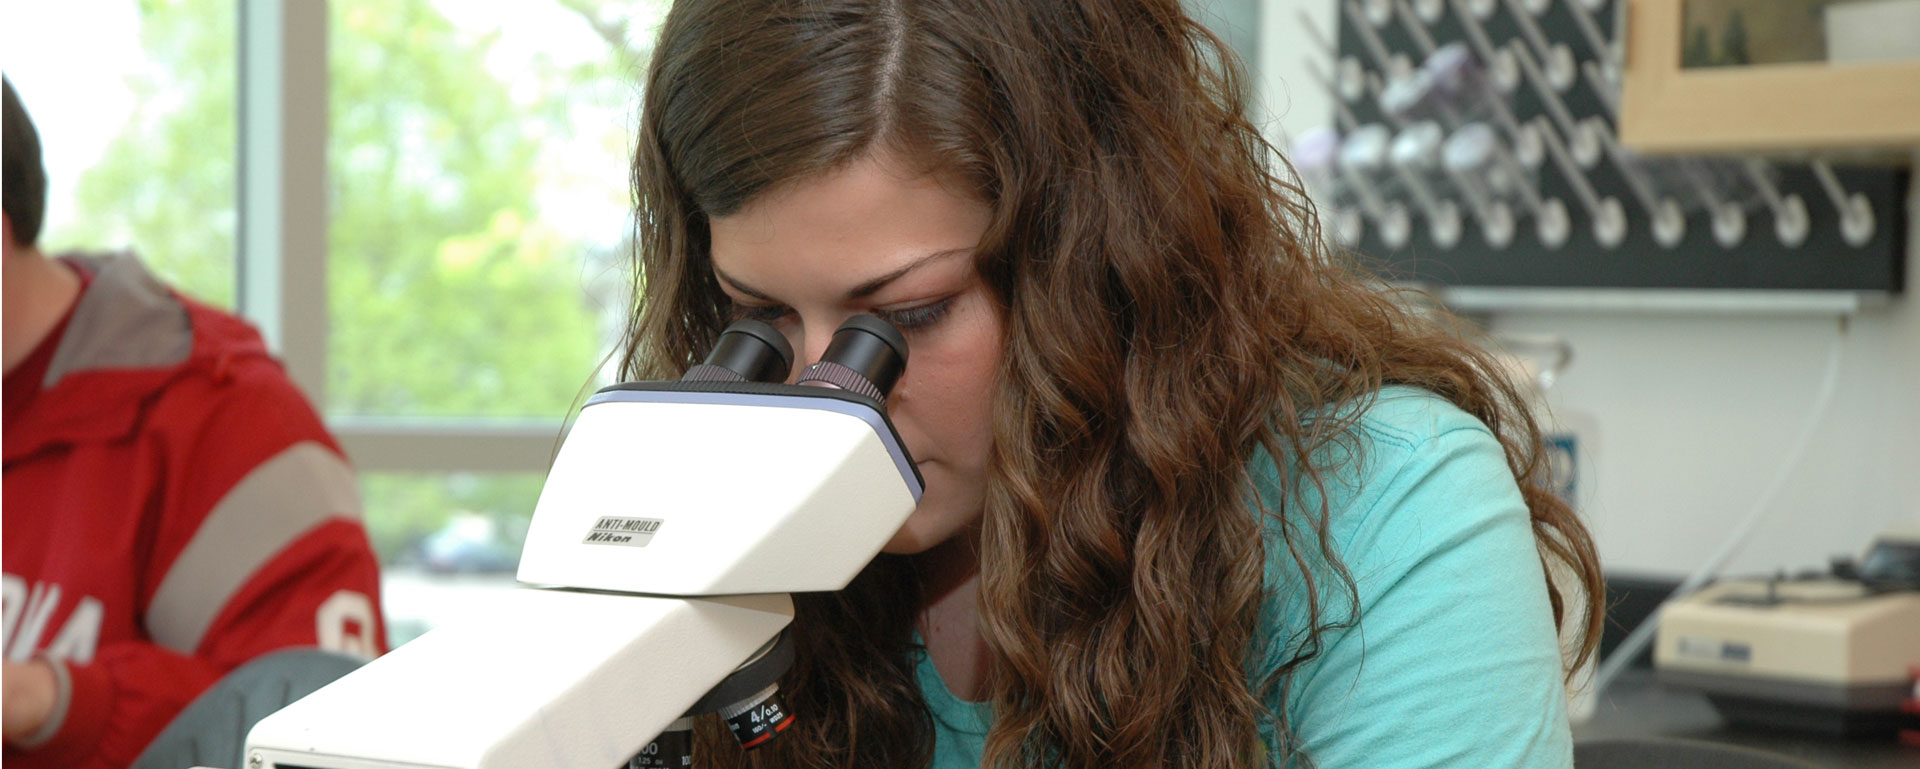 A biology student uses microscope while in a lab class.